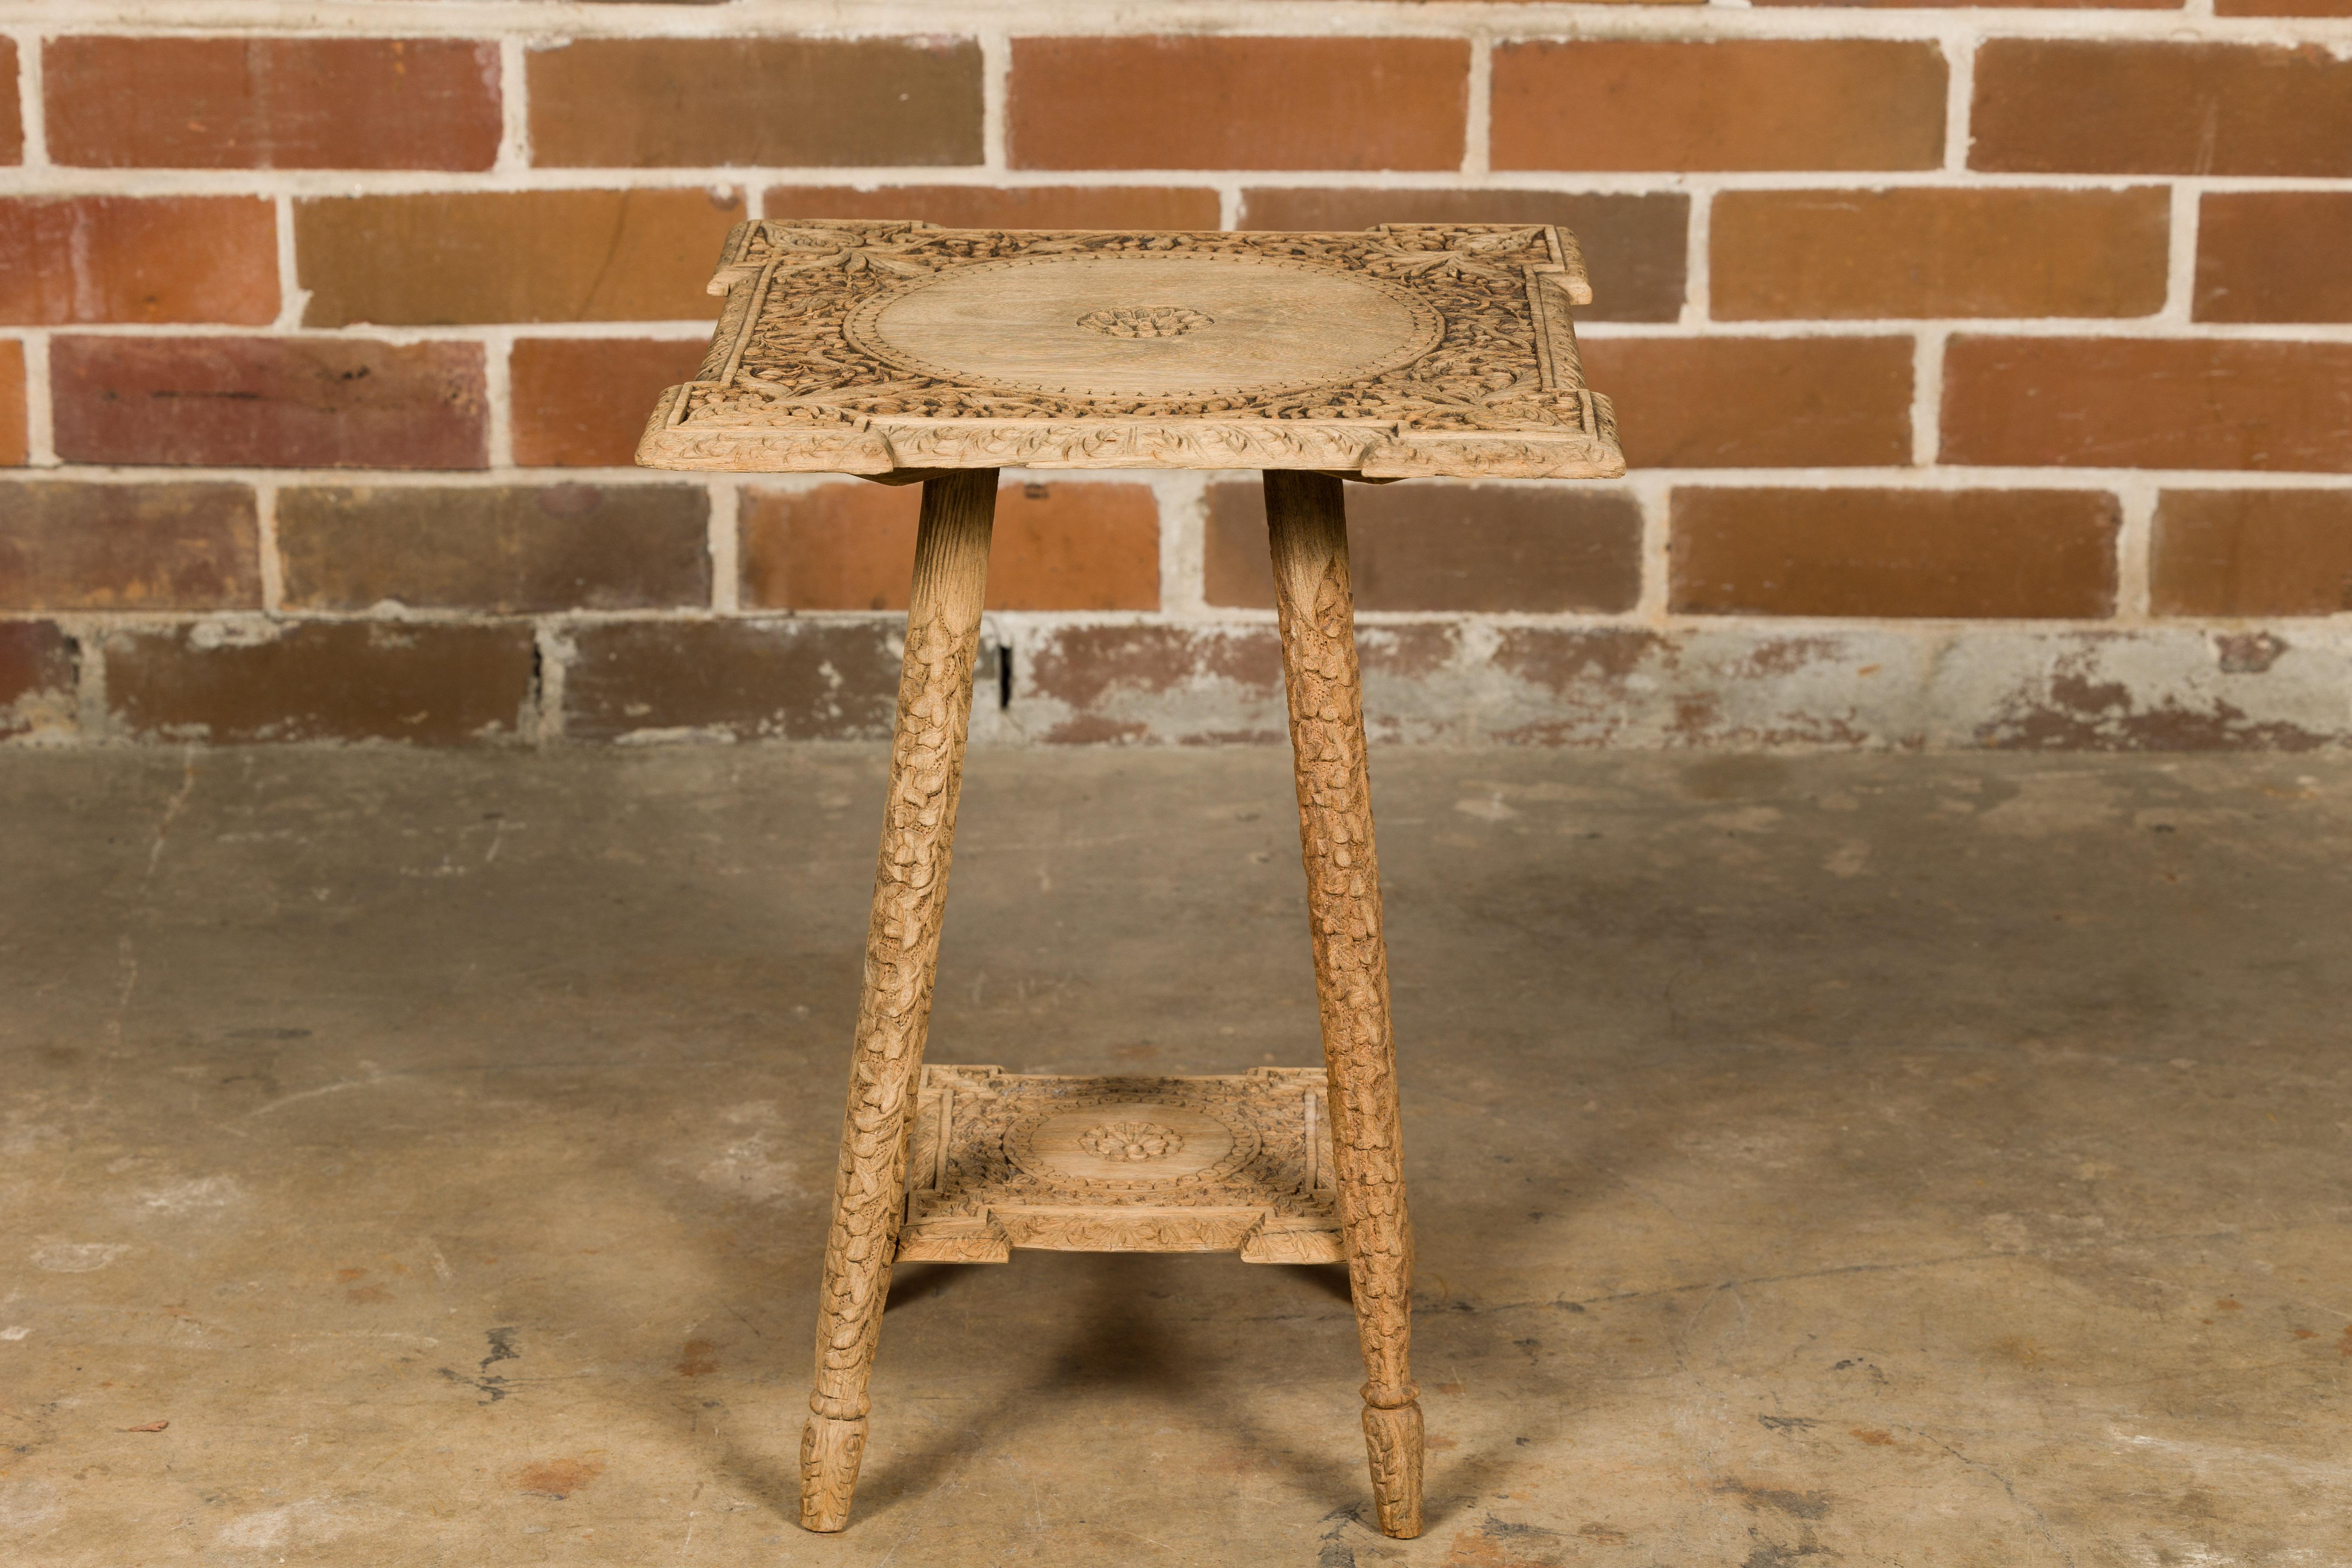 20th Century Moroccan 1900s Wooden Drinks Table with Abundant Hand-Carved Floral Décor 